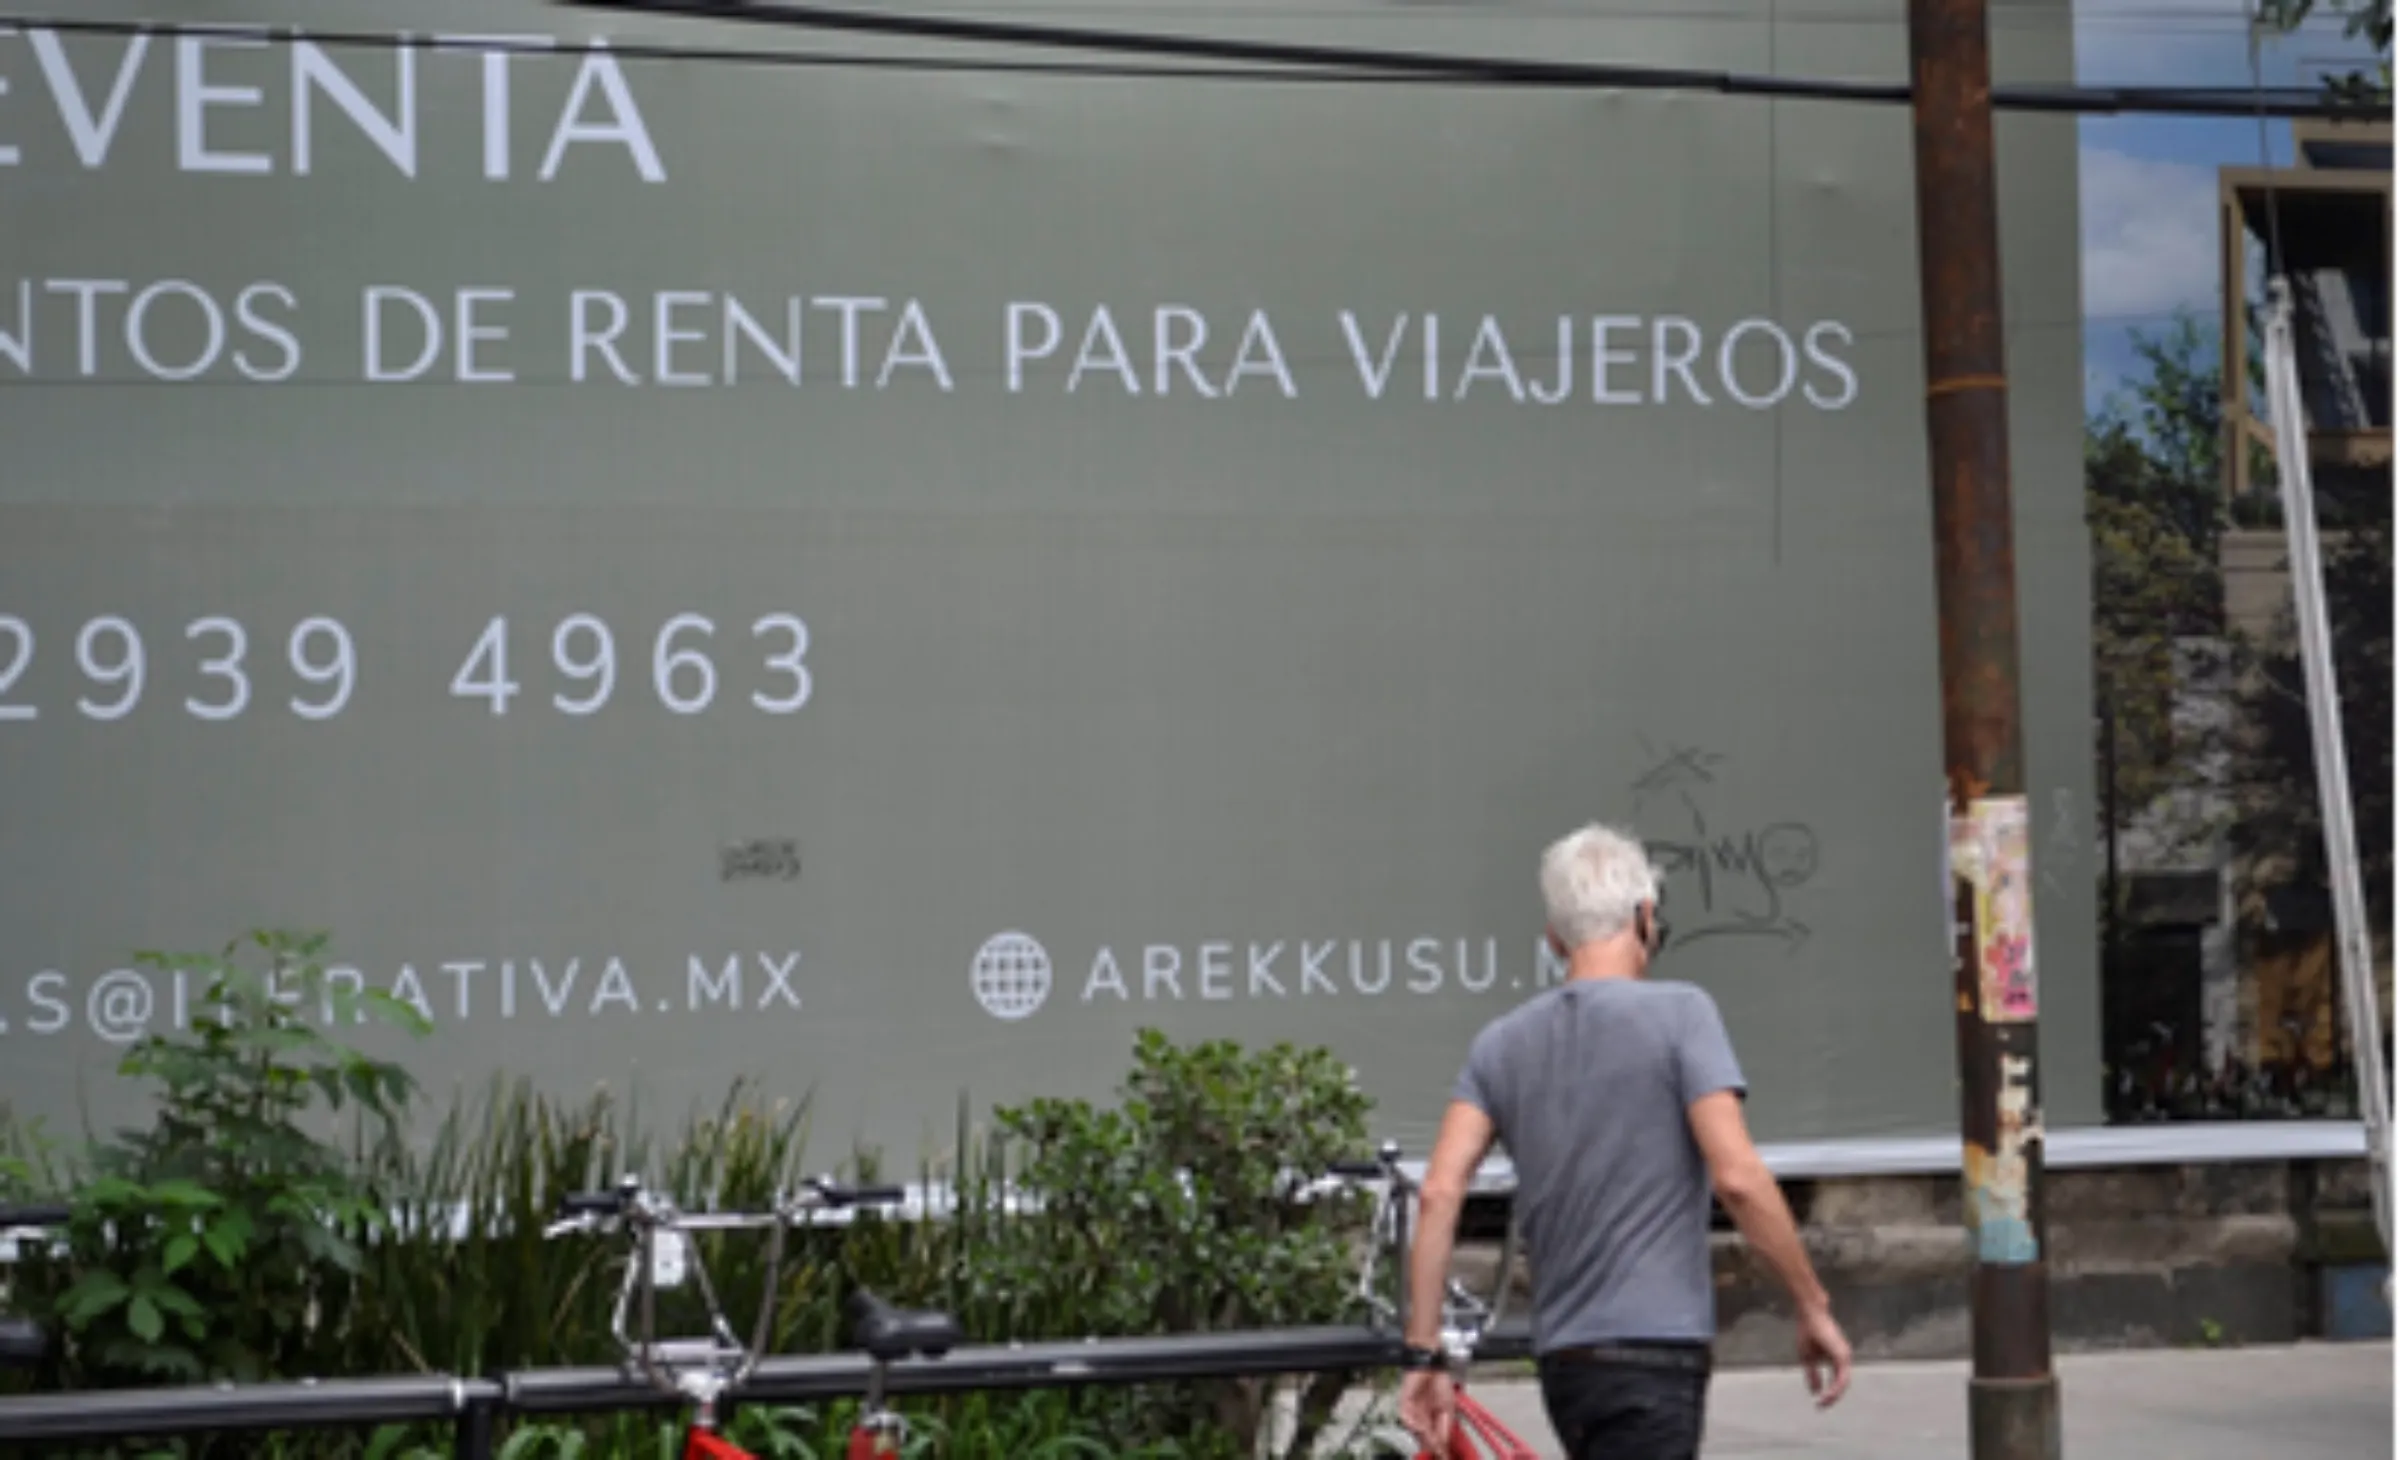 Building selling apartments exclusively for foreigners, Mexico City, Mexico August 2022. Thomson Reuters Foundation/Diana Baptista